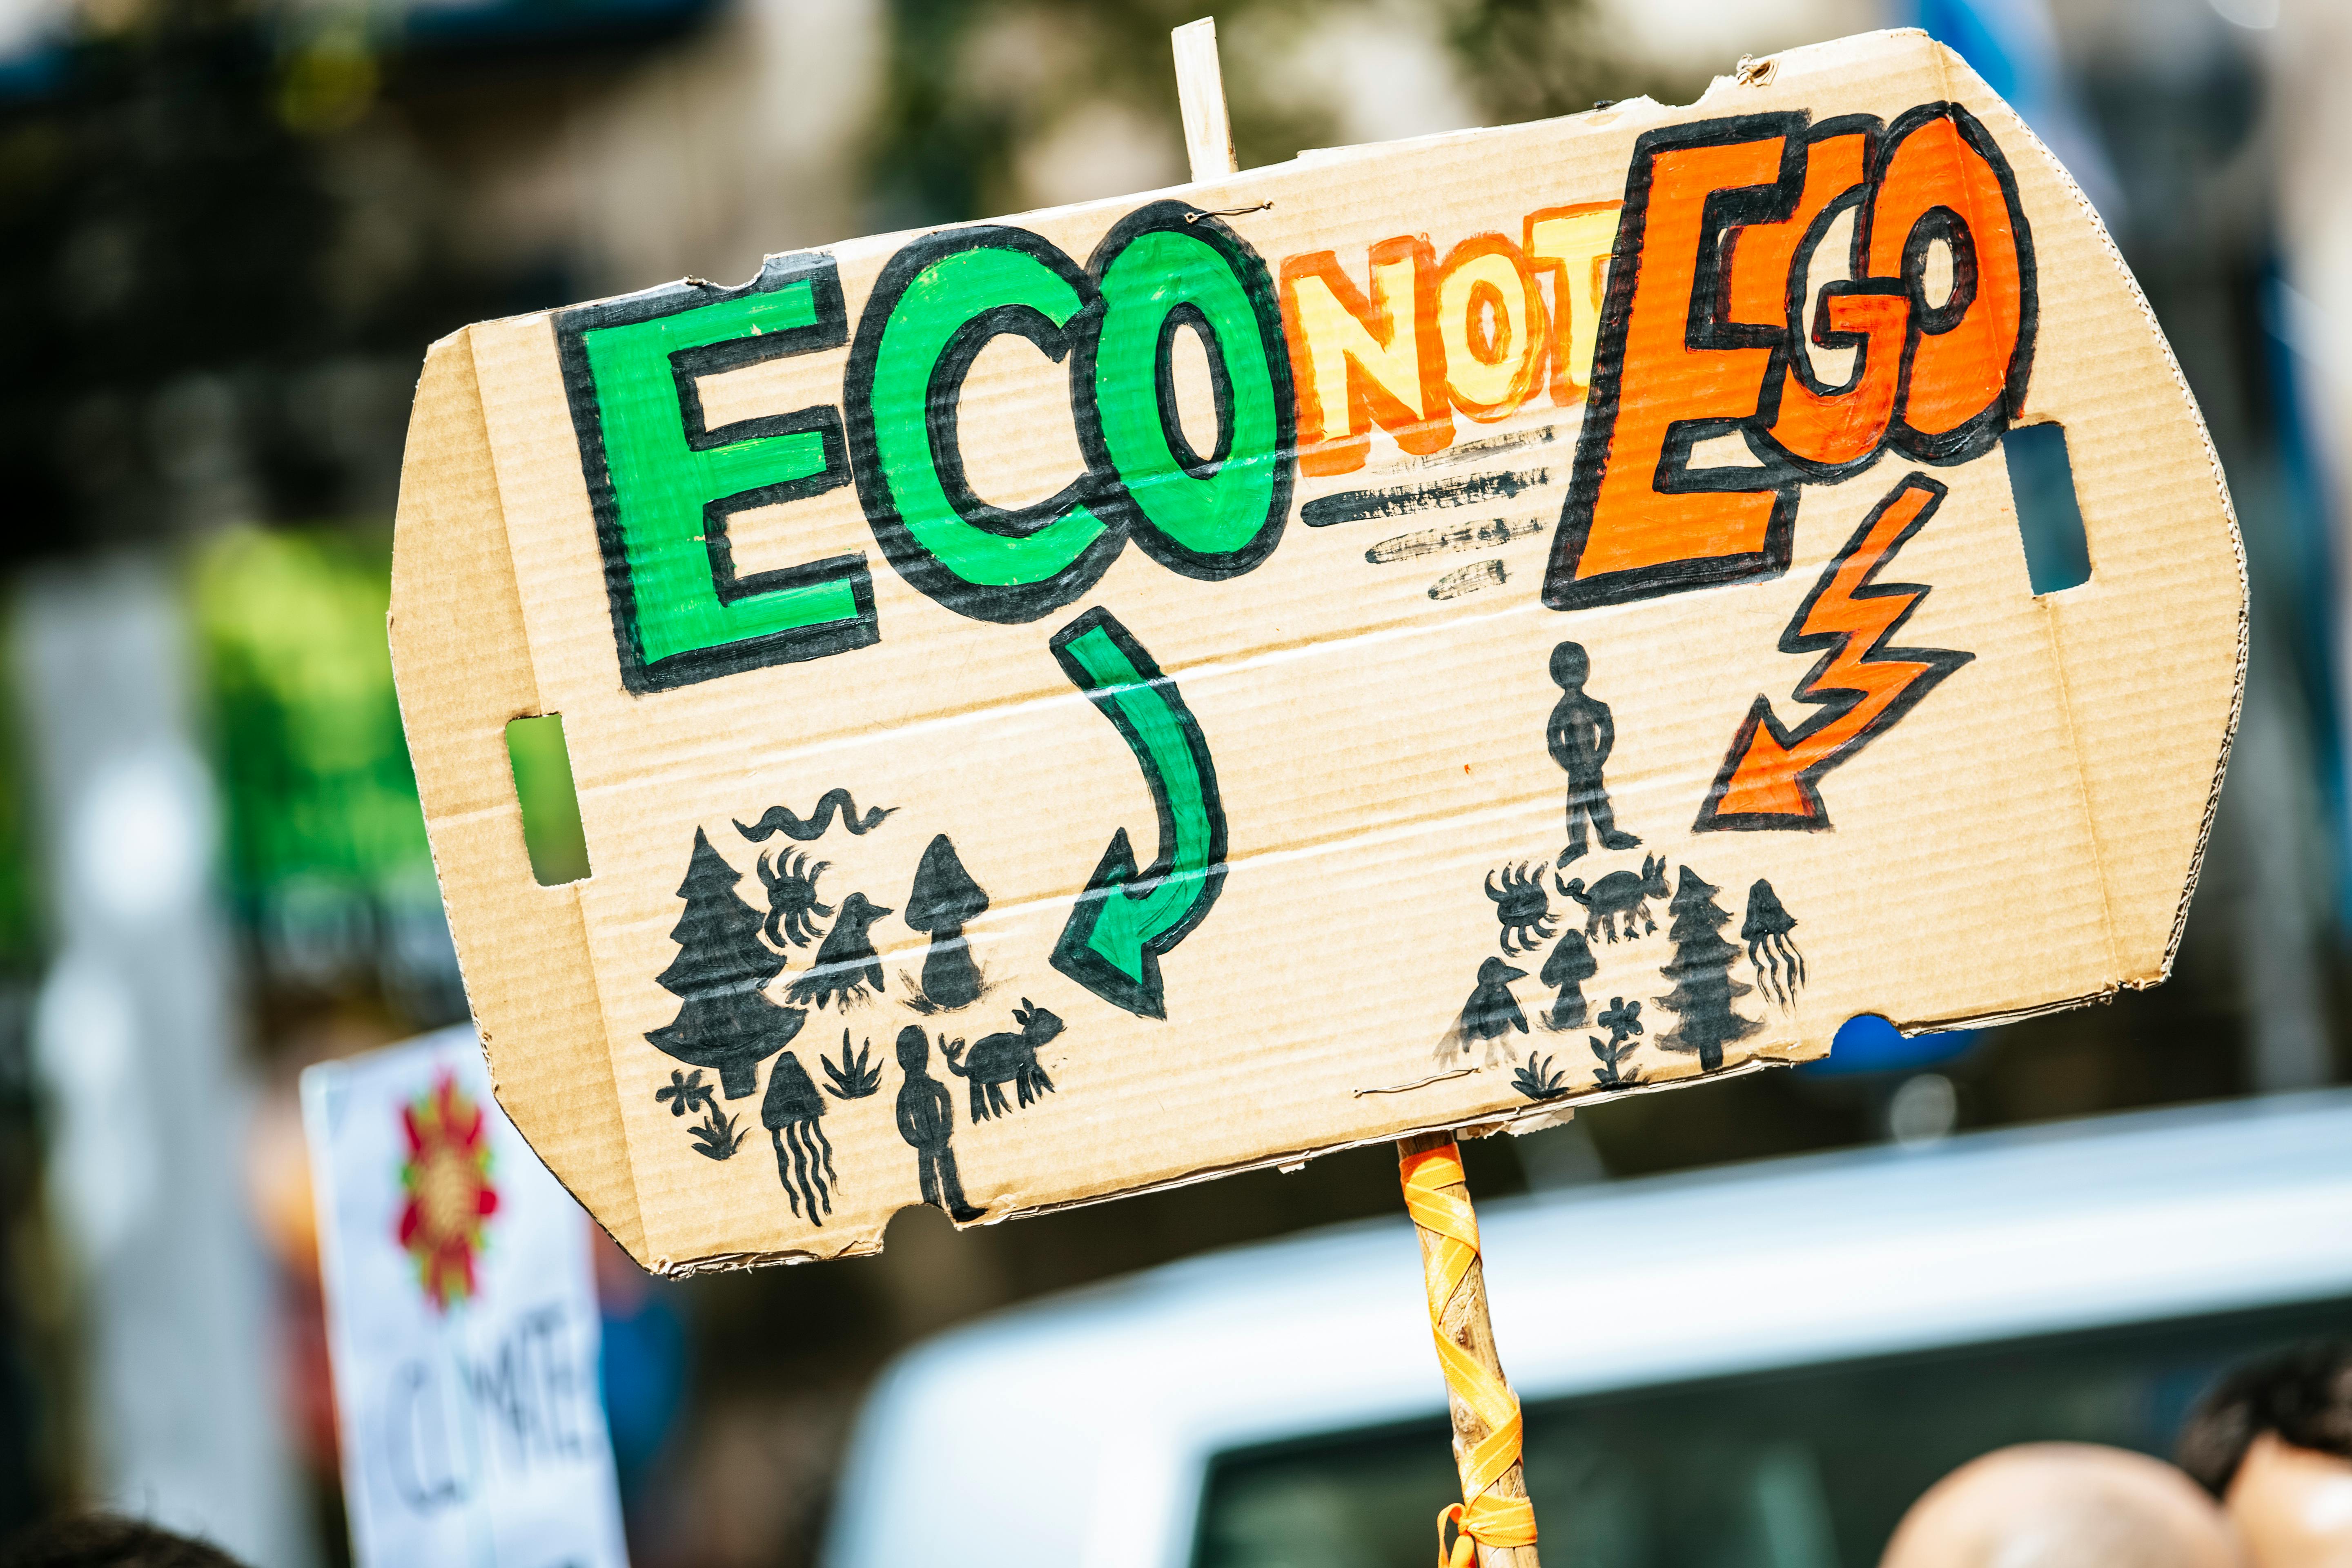 Climate protest sign, reading "eco not ego"